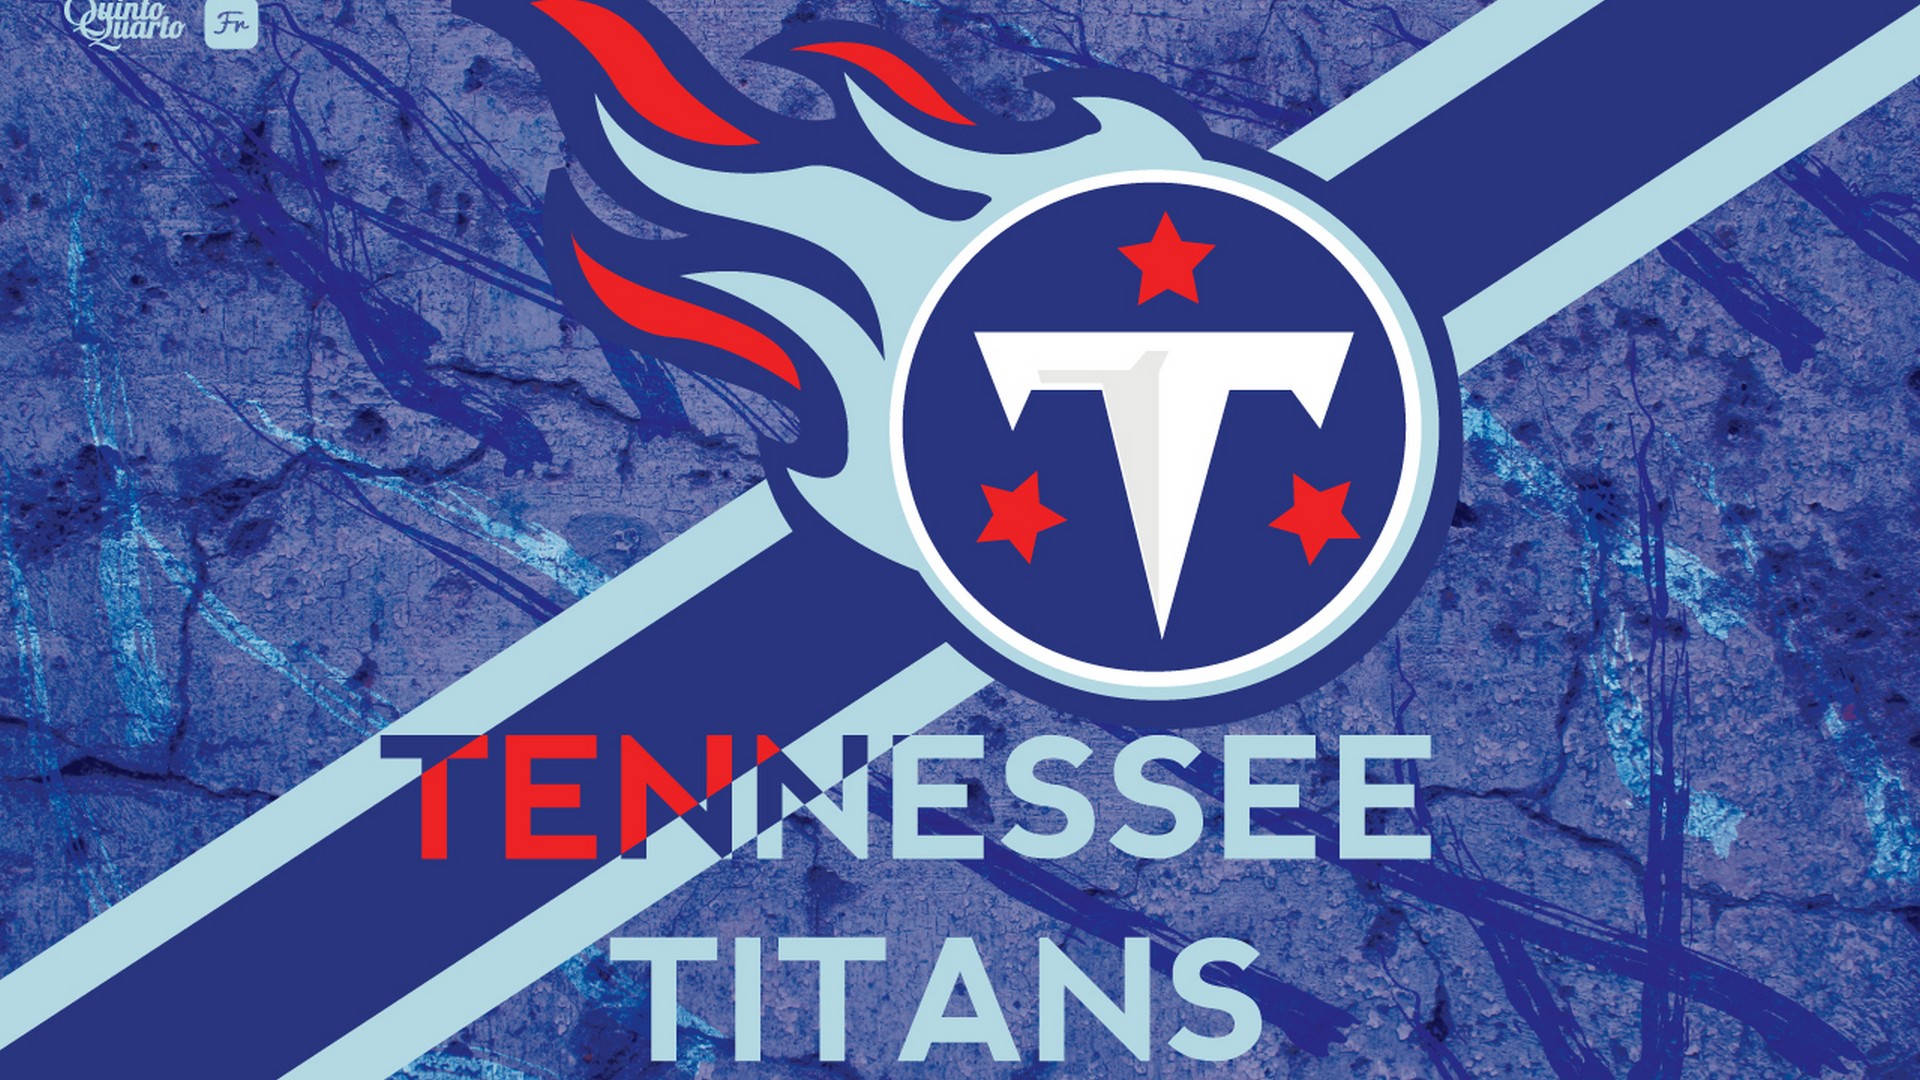 Wallpapers HD Tennessee Titans with high-resolution 1920x1080 pixel. You can use this wallpaper for your Mac or Windows Desktop Background, iPhone, Android or Tablet and another Smartphone device